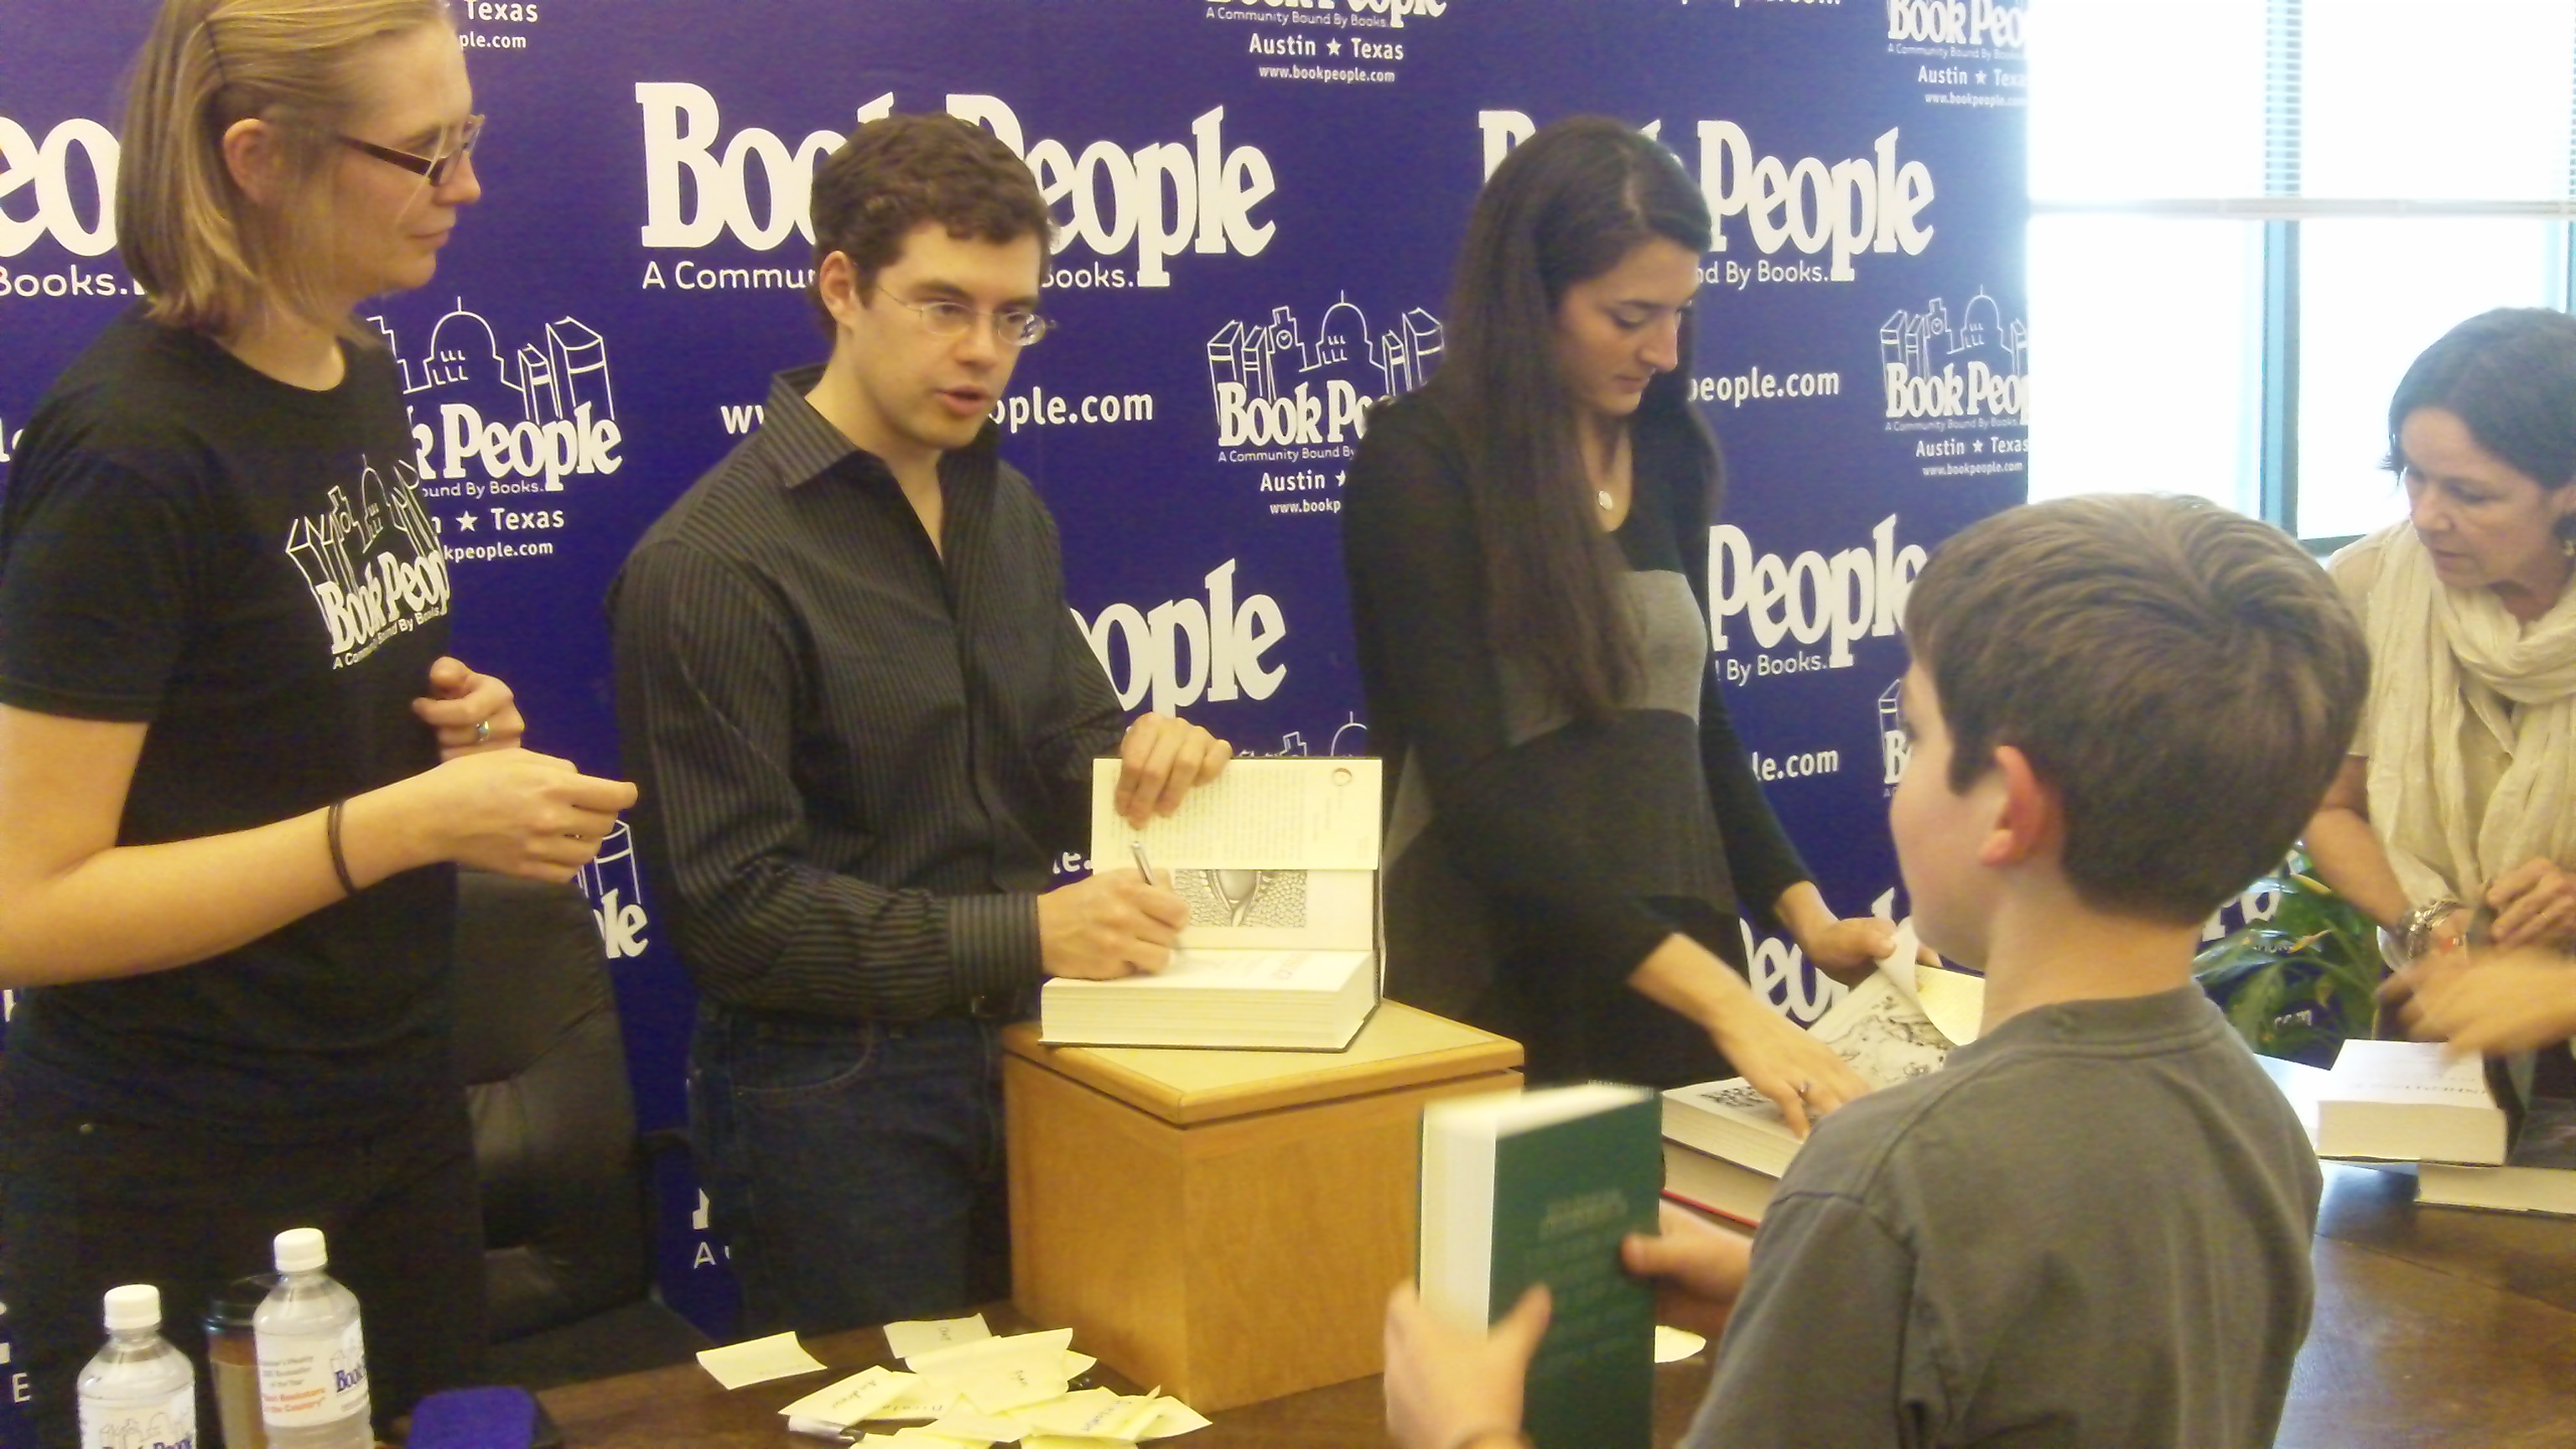 Meet Christopher Paolini at upcoming events in Montana (May 28-29) and Alaska (June 11-12)